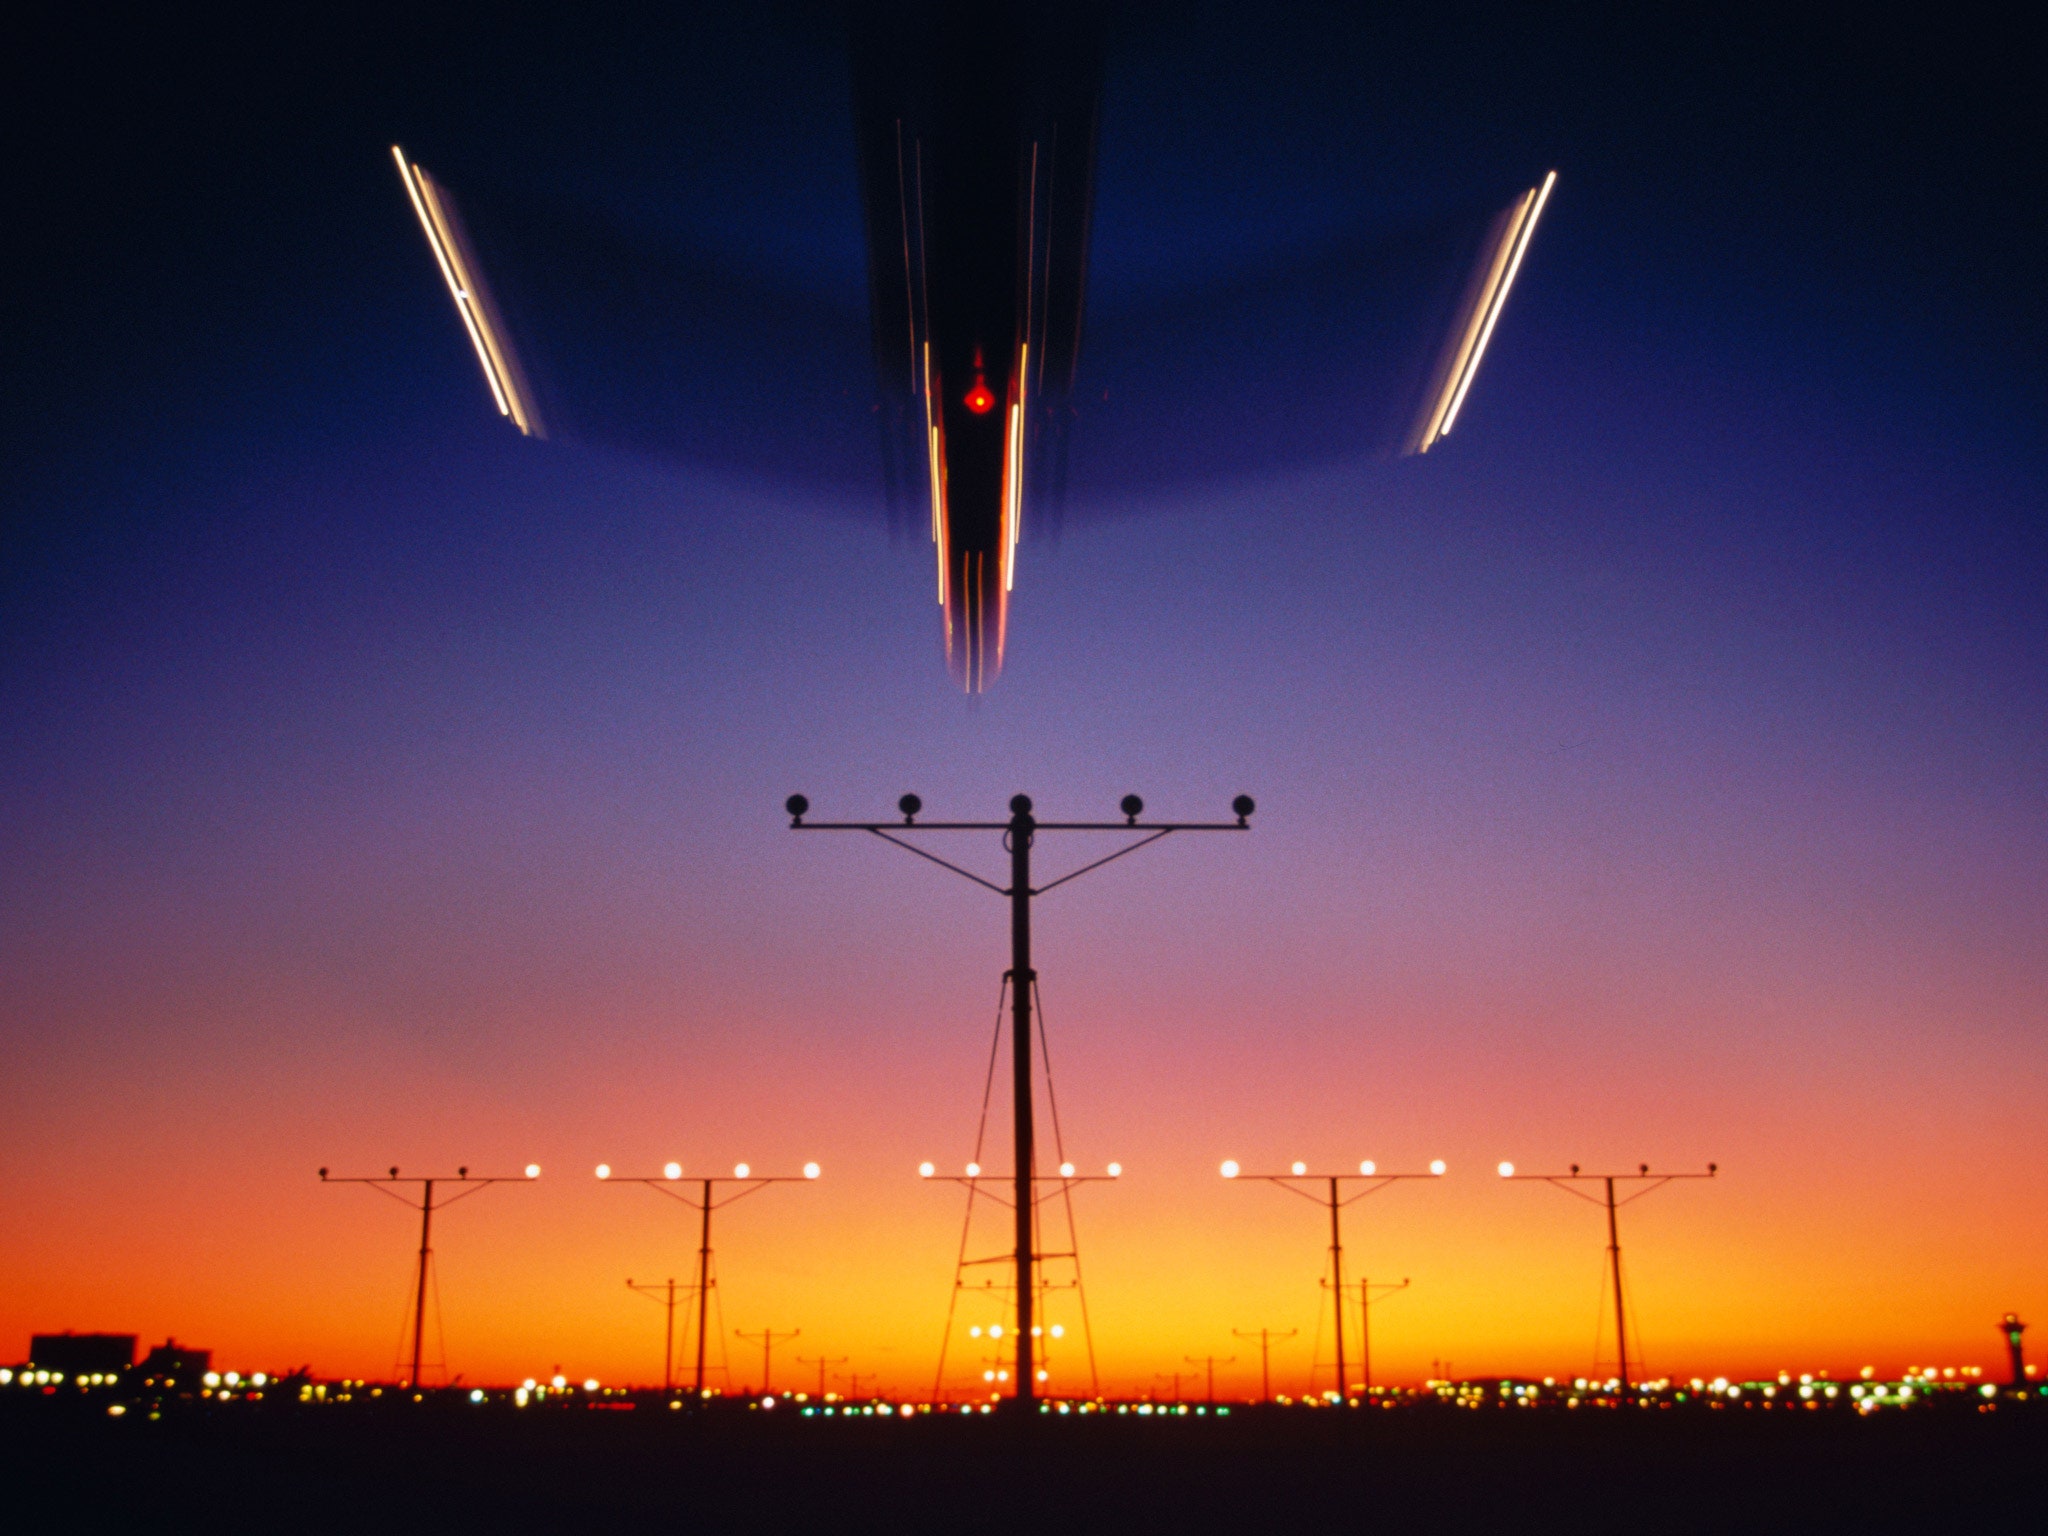 U.S. Air Traffic Control May Change in a Major Way. Condé Nast Traveler